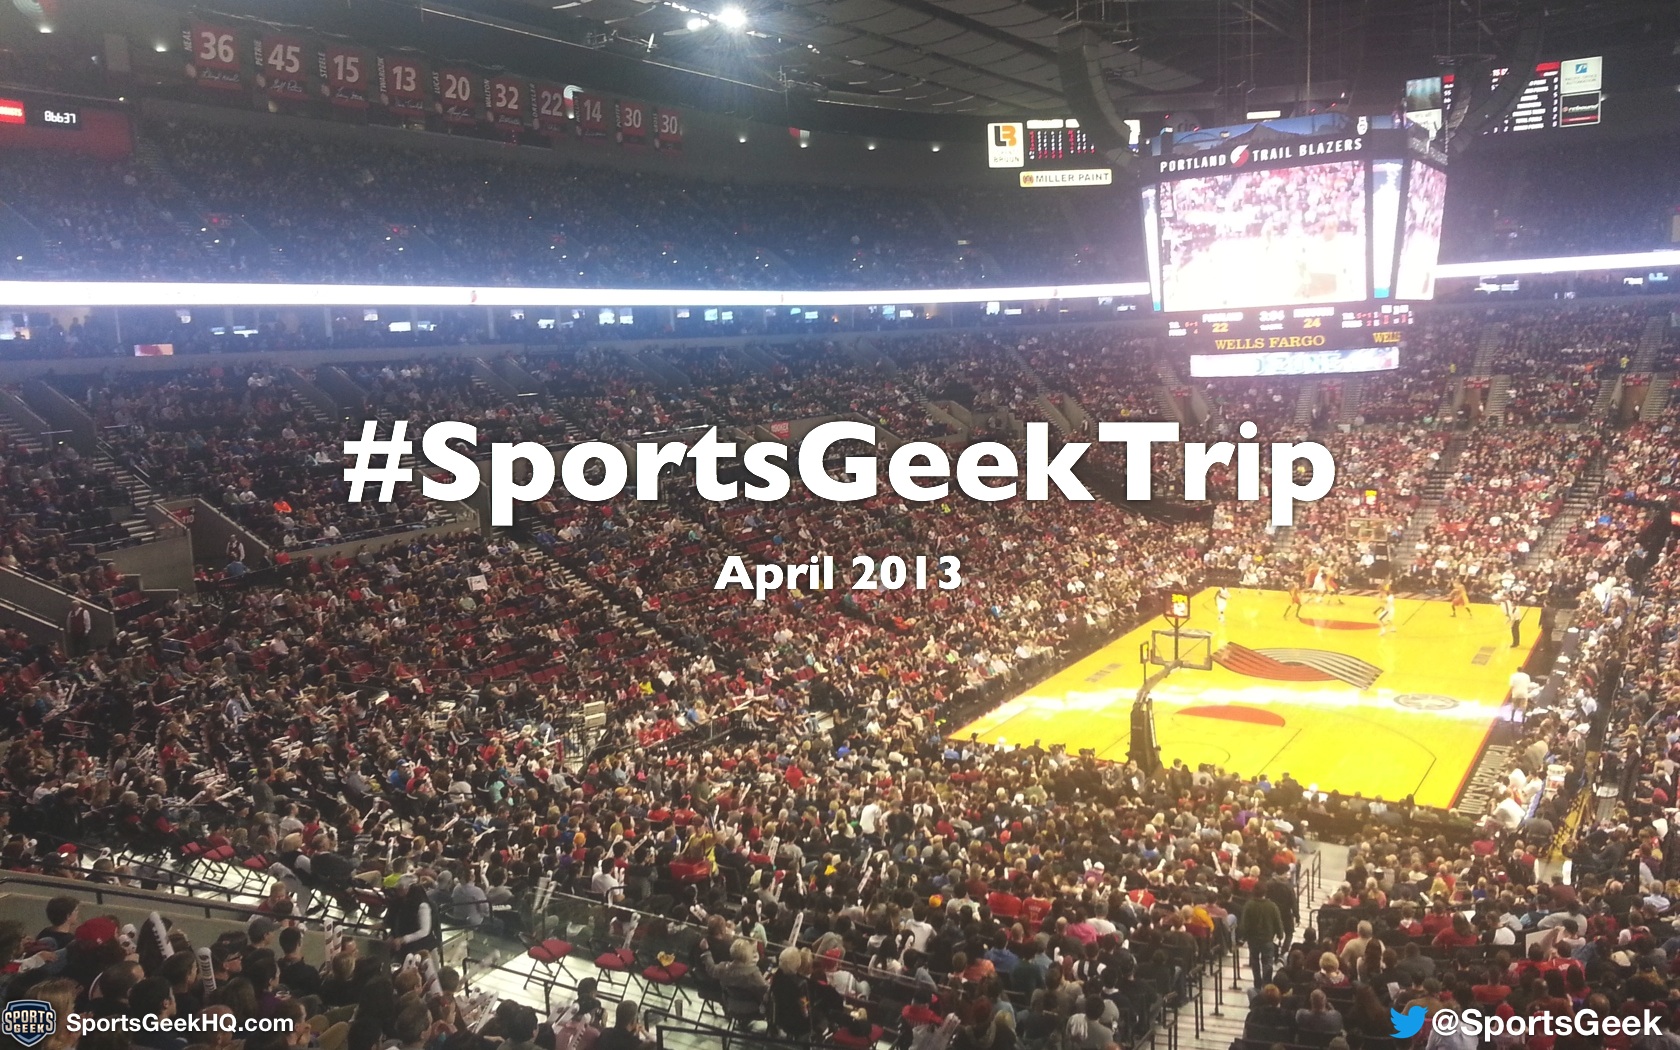 Recap of Sports Geek trip on West Coast catching up with NBA, MLB & MLS teams